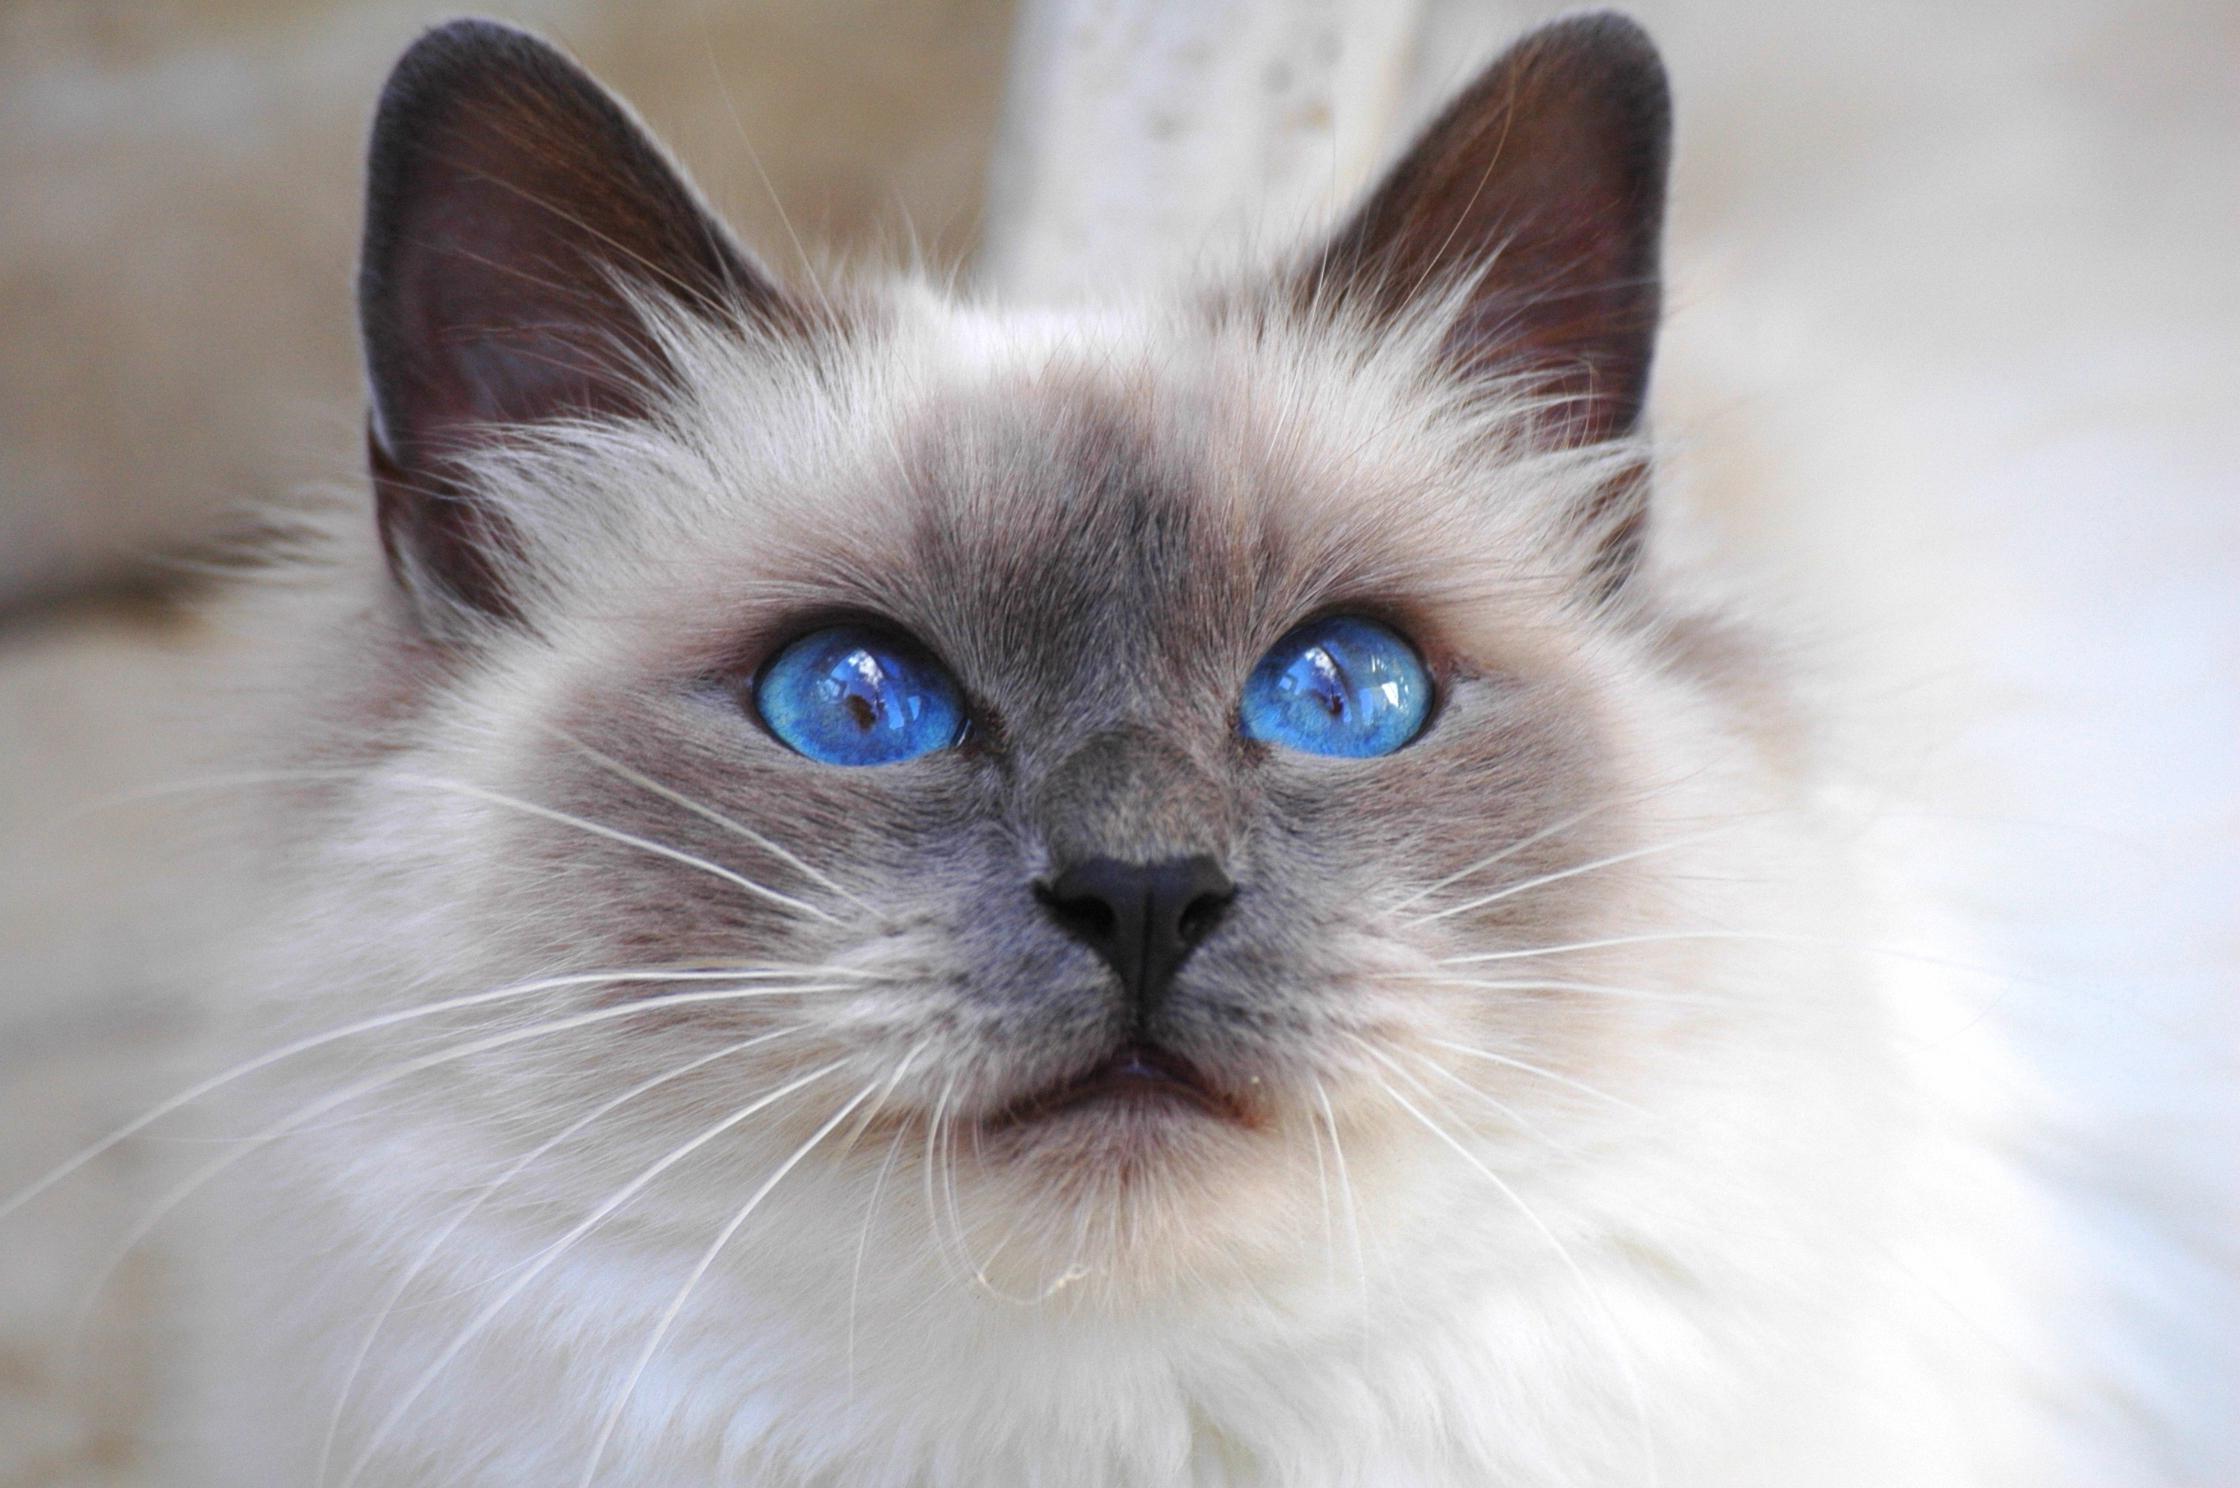 Download background cats, animal, cat, blue eyes, eye, face, fluffy, gray